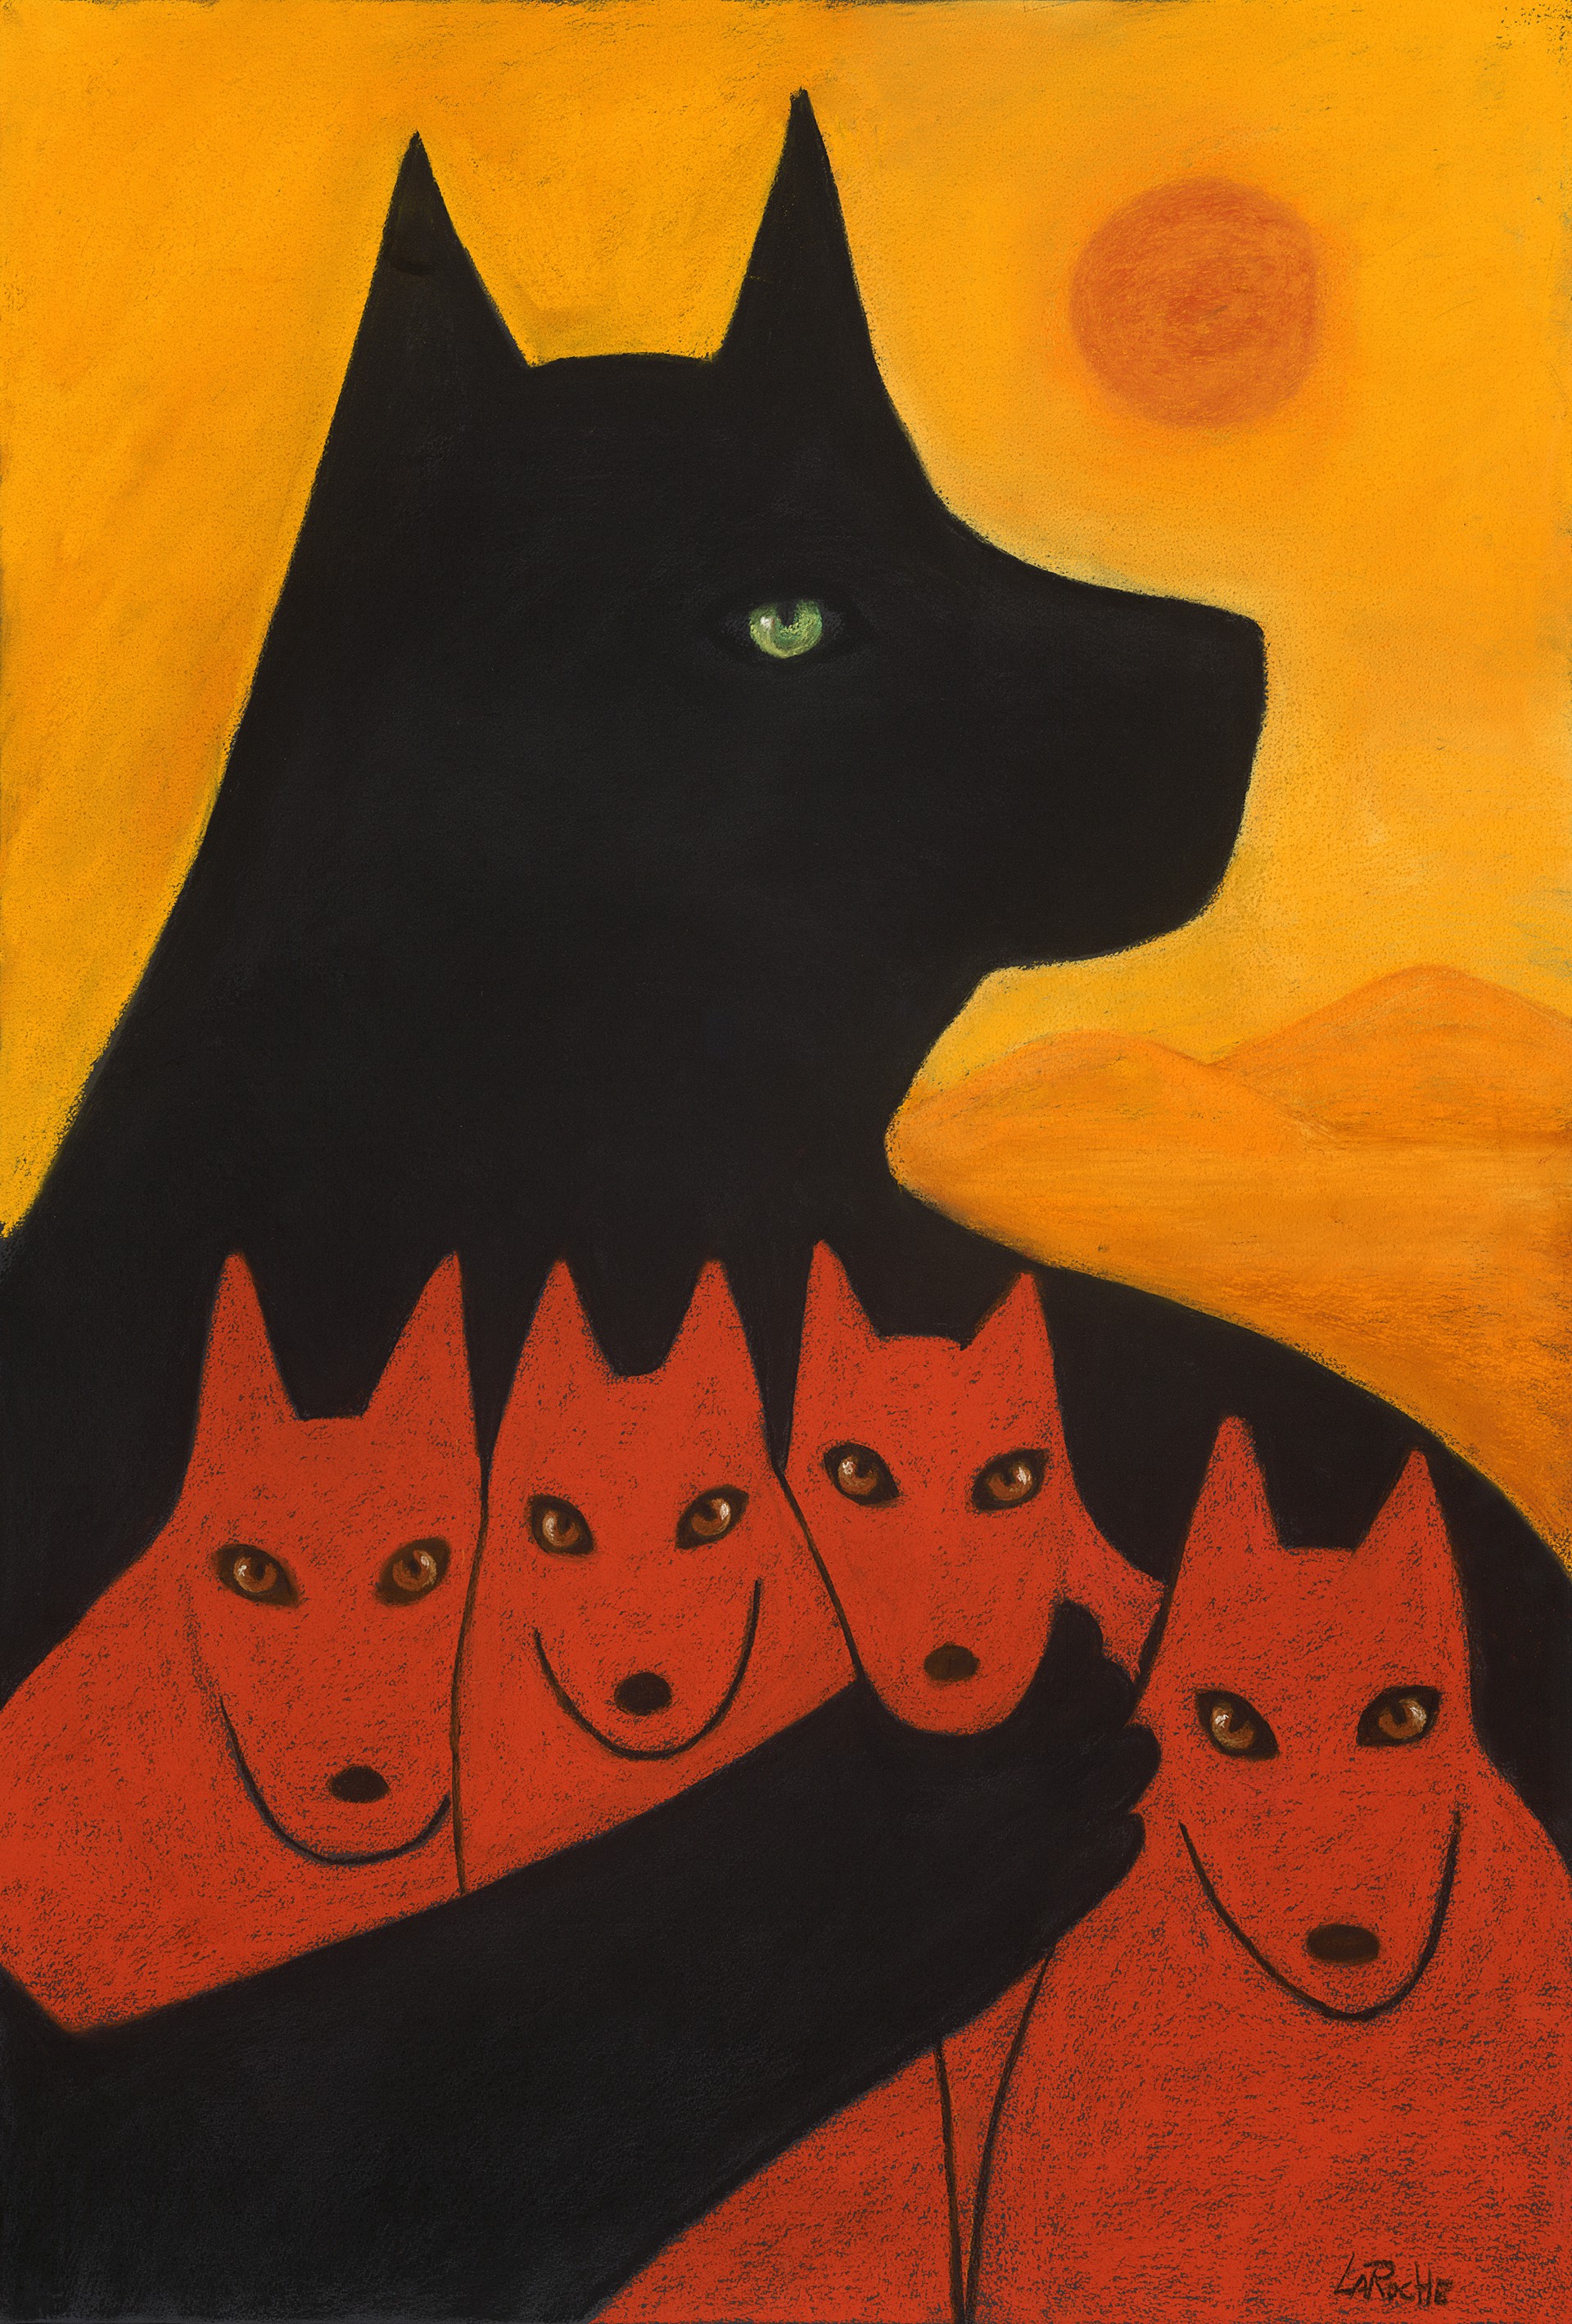 Protector with Pups - Medium Framed $2200 by Carole LaRoche